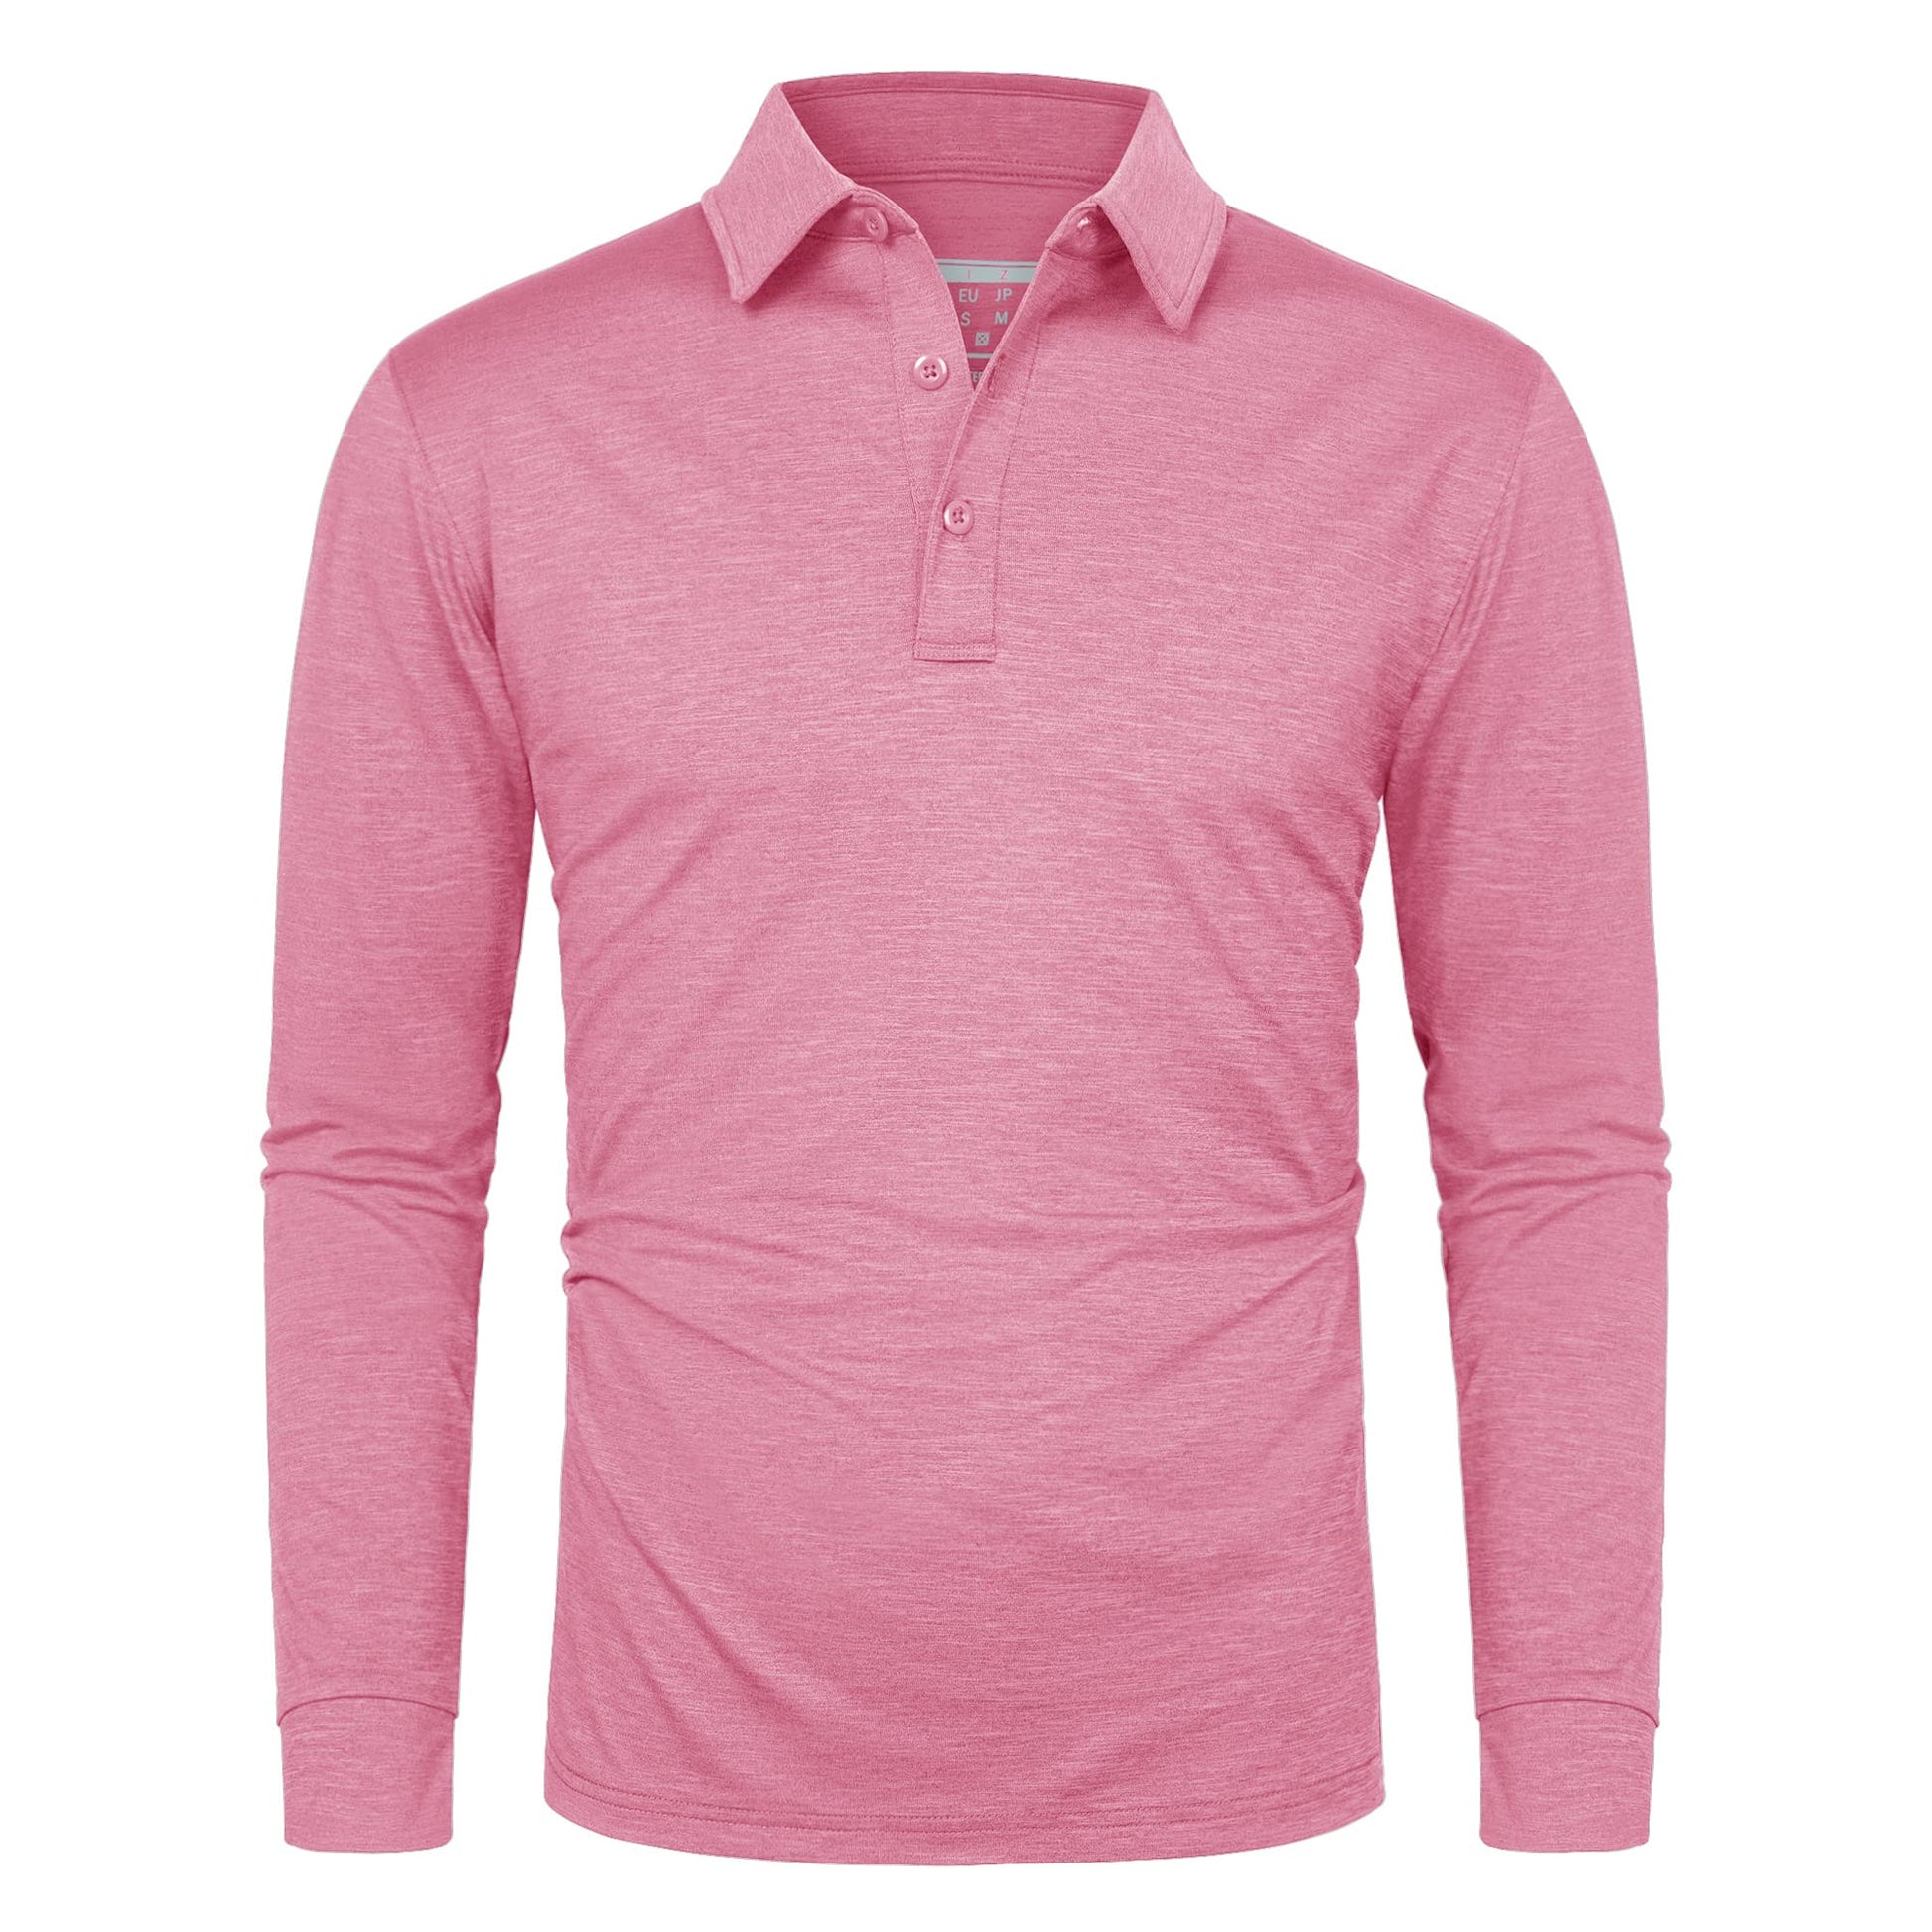 Soft Polyester Golf Polo Long Sleeve Shirt in pink